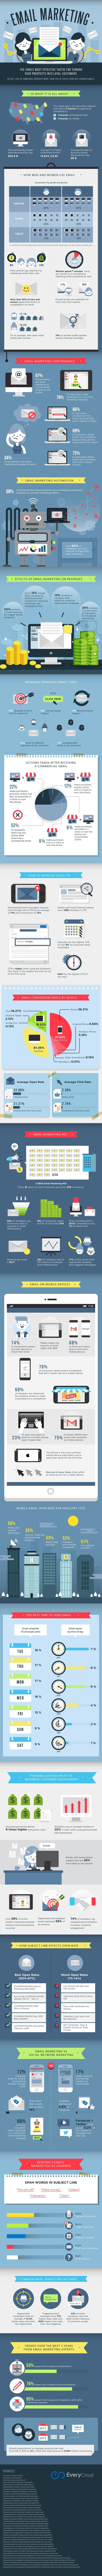 Your Giant Email Marketing Statistics Guide [Infographic]